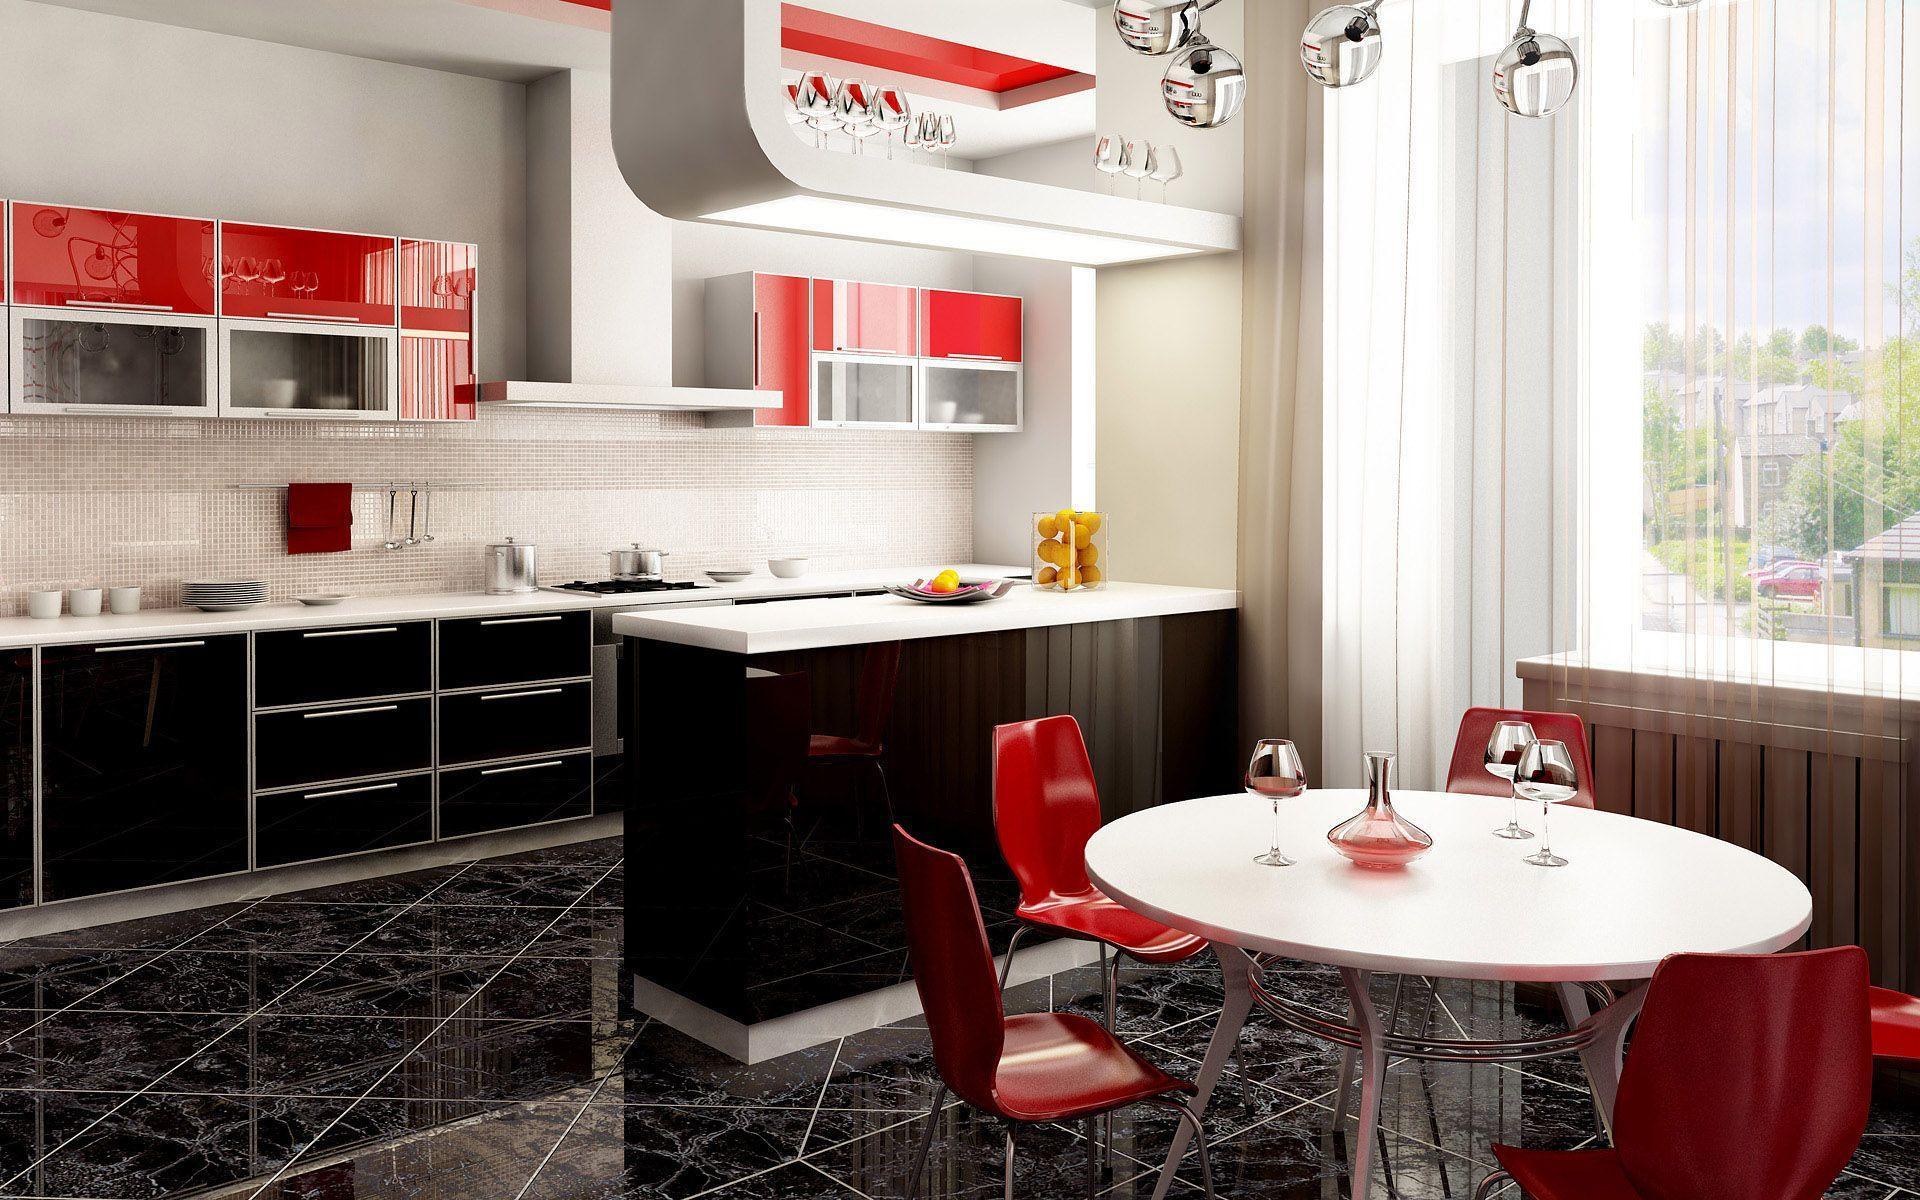 The kitchen and dining room / red and black wallpaper and image